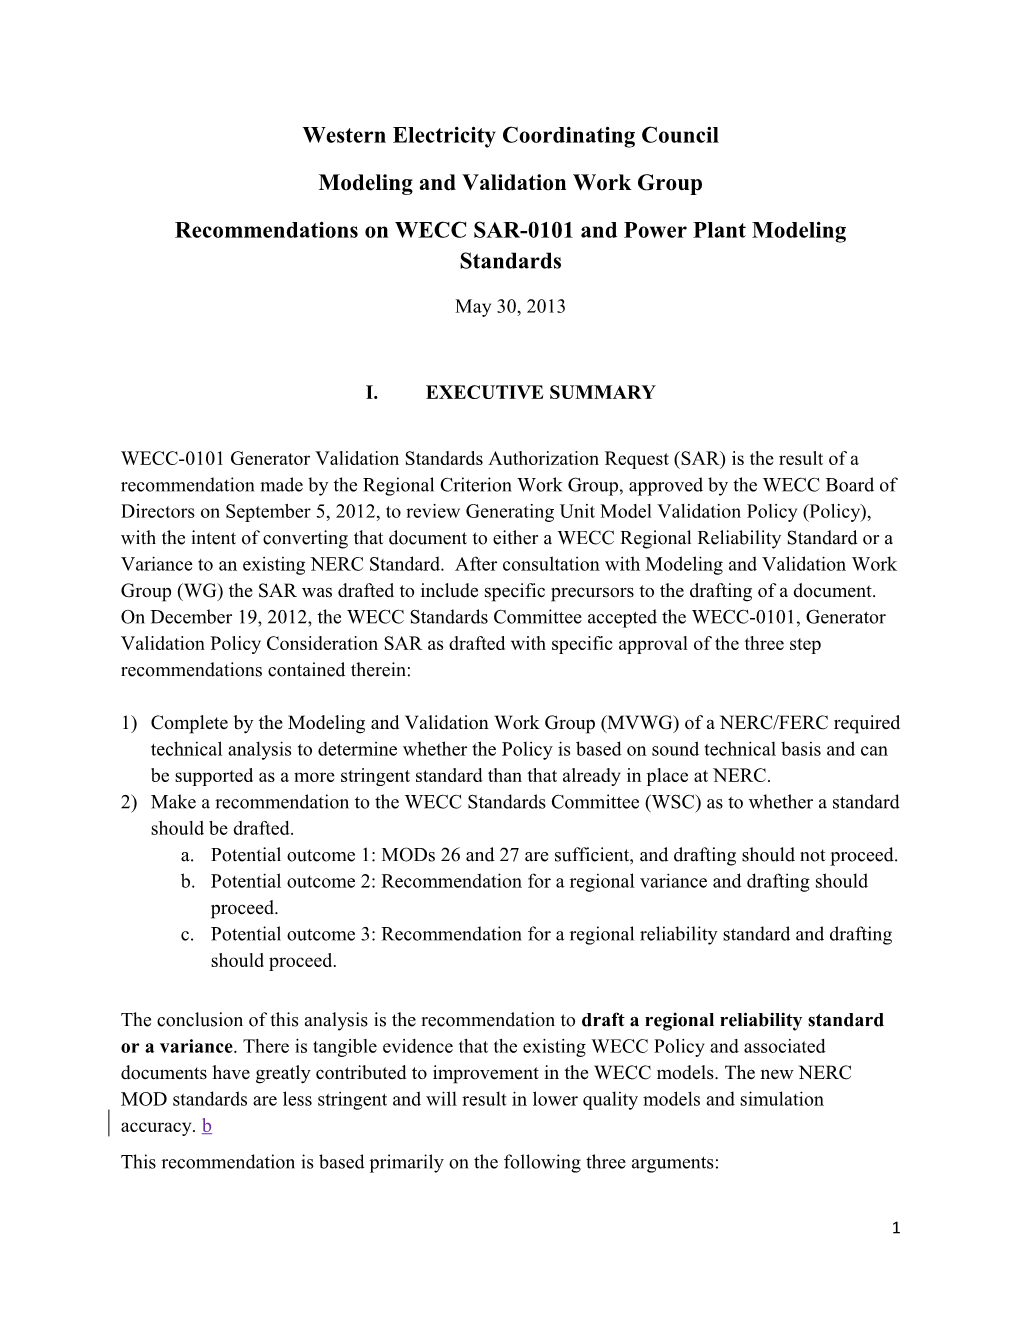 WECC-0101 MVWG Technical Study in Support of MOD 26 27 Variance